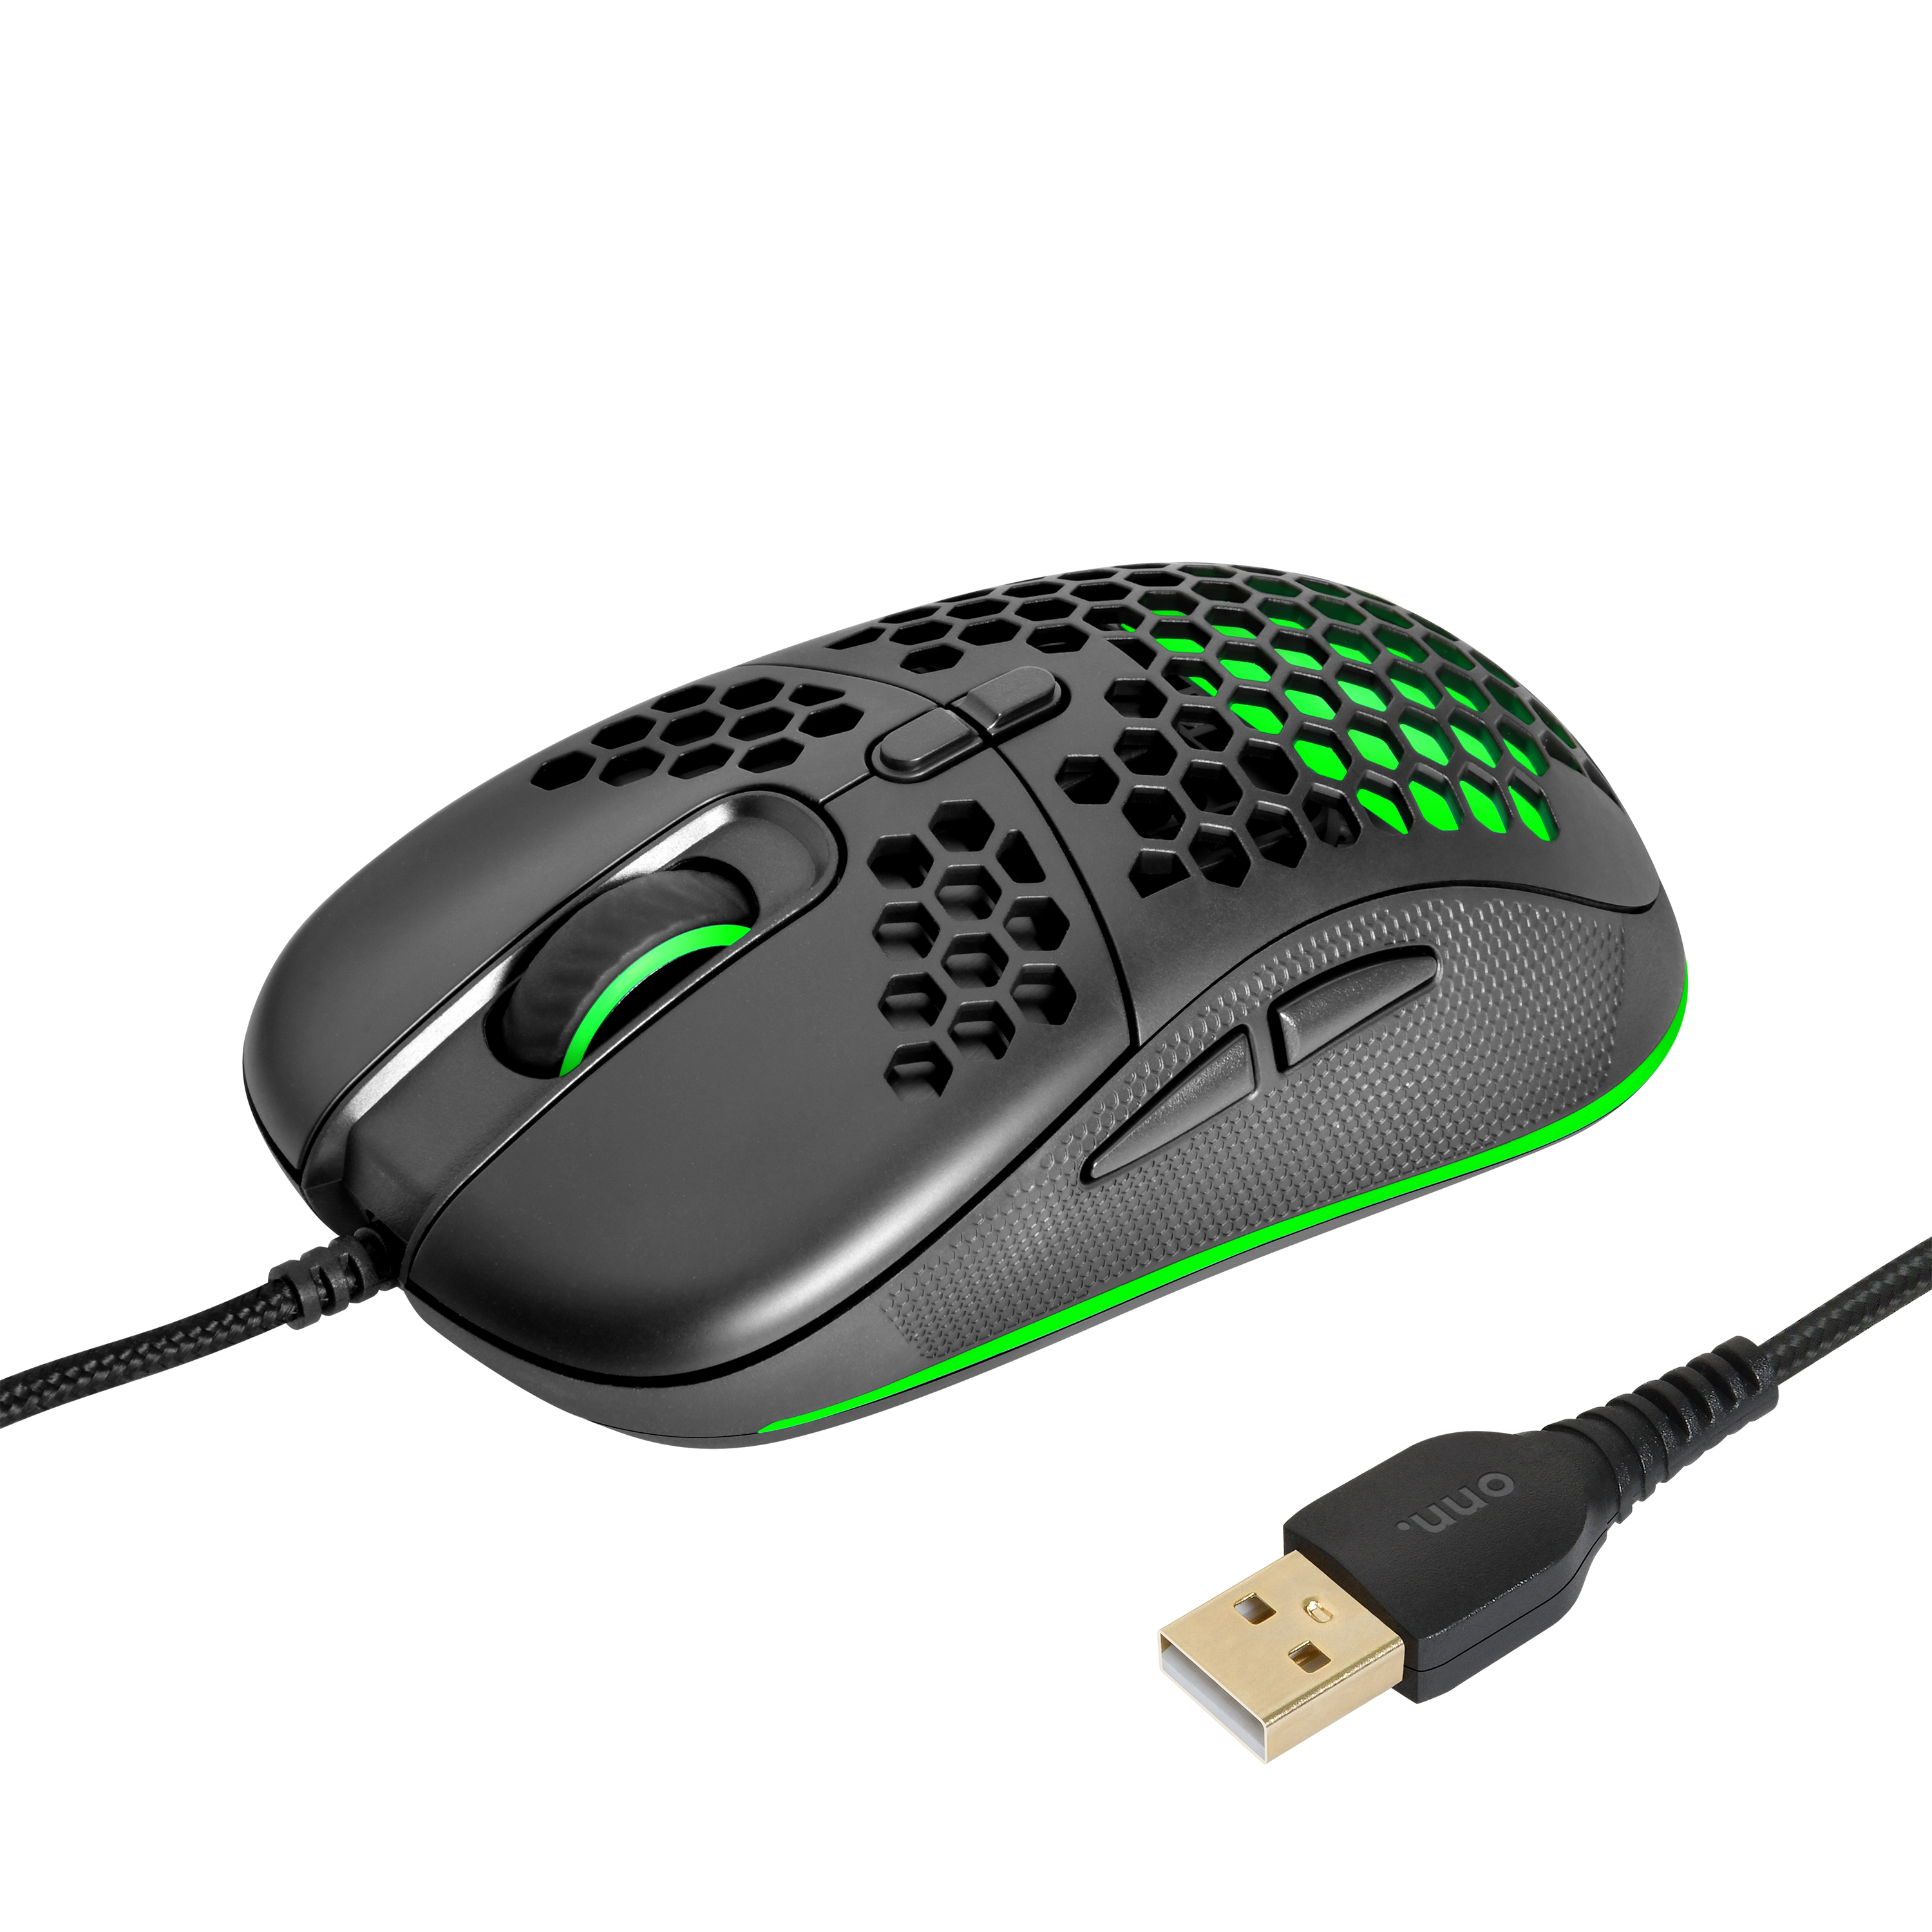 onn. Lightweight Gaming Mouse with LED Lighting and 7 Programmable Buttons, Adjustable 200-7200 DPI - image 5 of 13